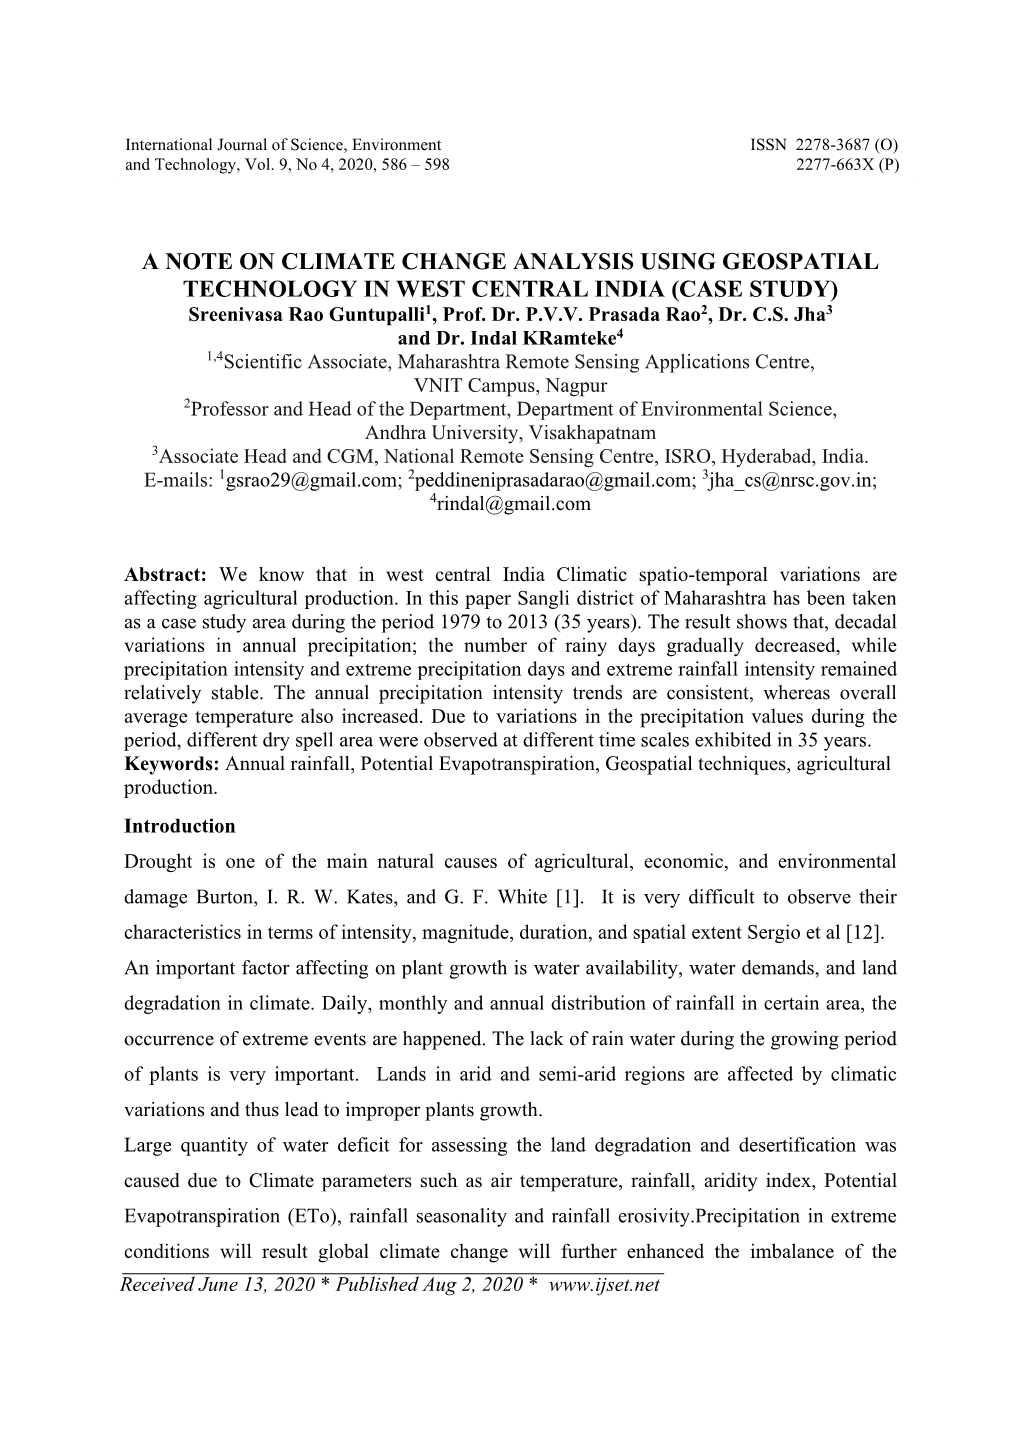 A NOTE on CLIMATE CHANGE ANALYSIS USING GEOSPATIAL TECHNOLOGY in WEST CENTRAL INDIA (CASE STUDY) Sreenivasa Rao Guntupalli1, Prof